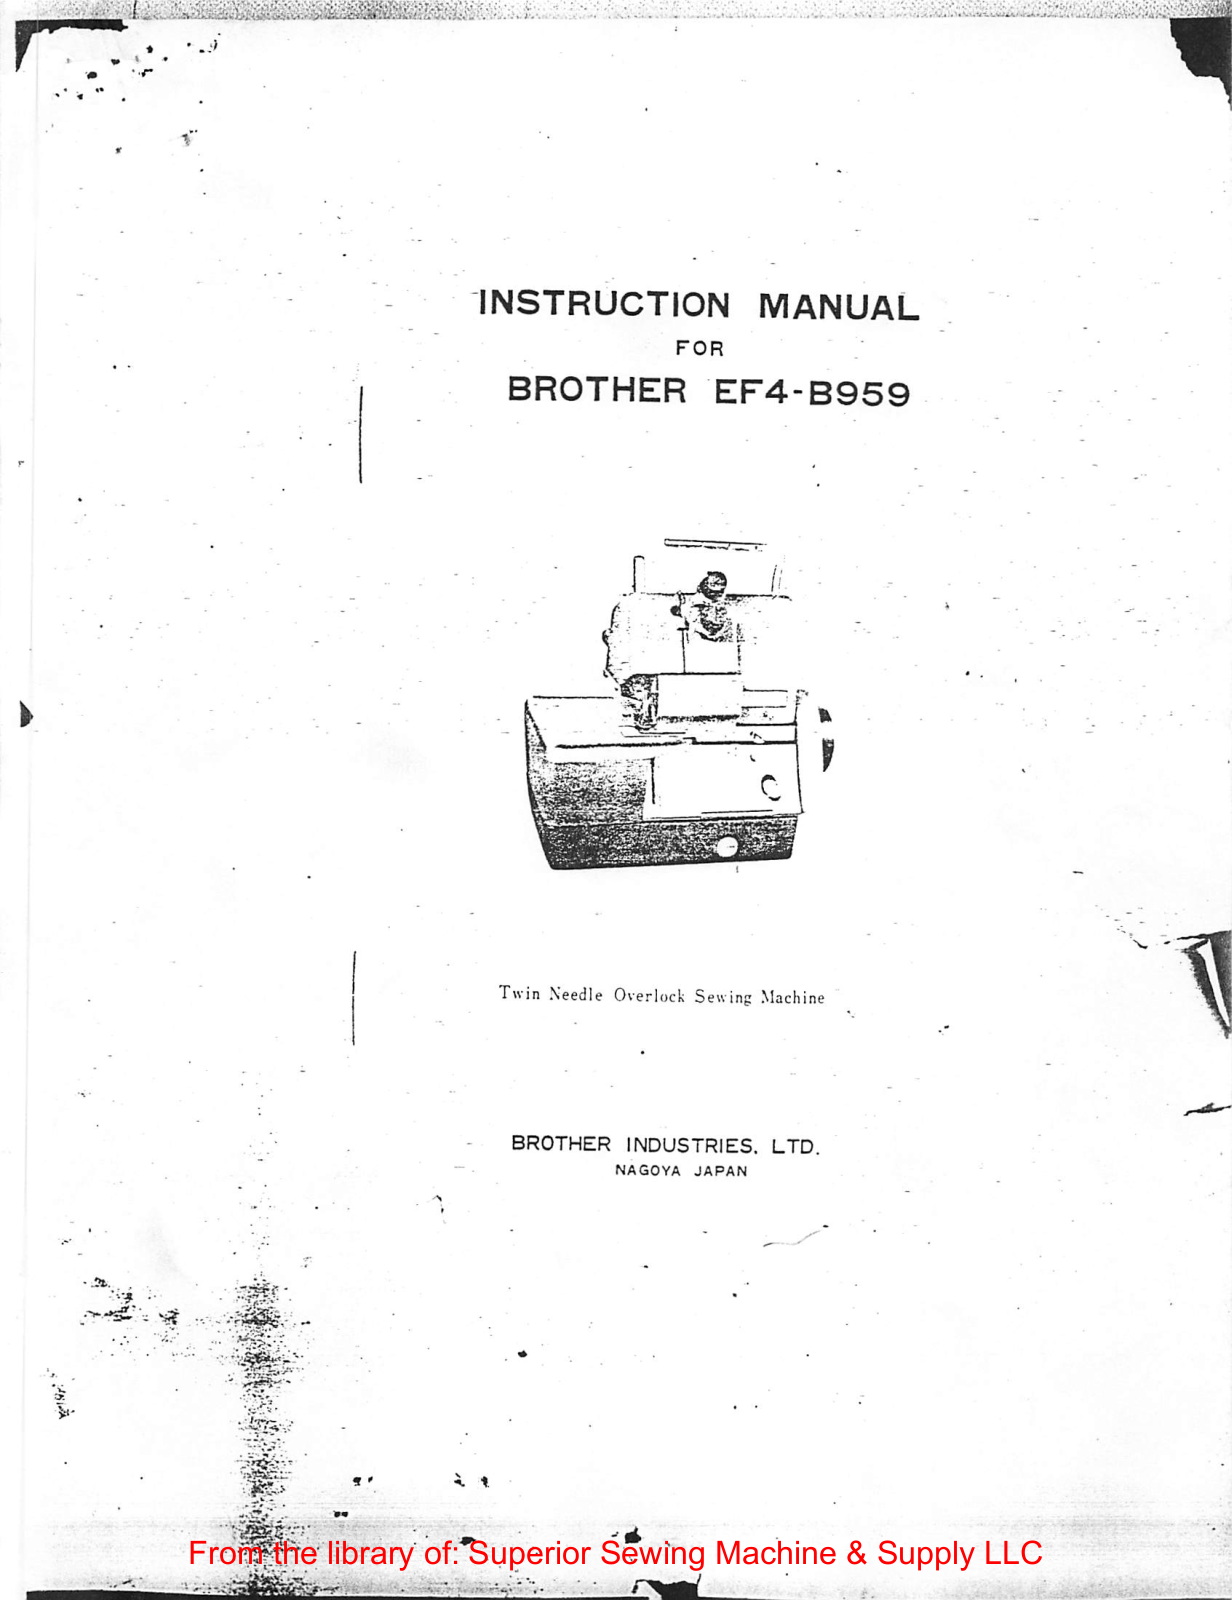 Brother EF4-B959 Instruction Manual